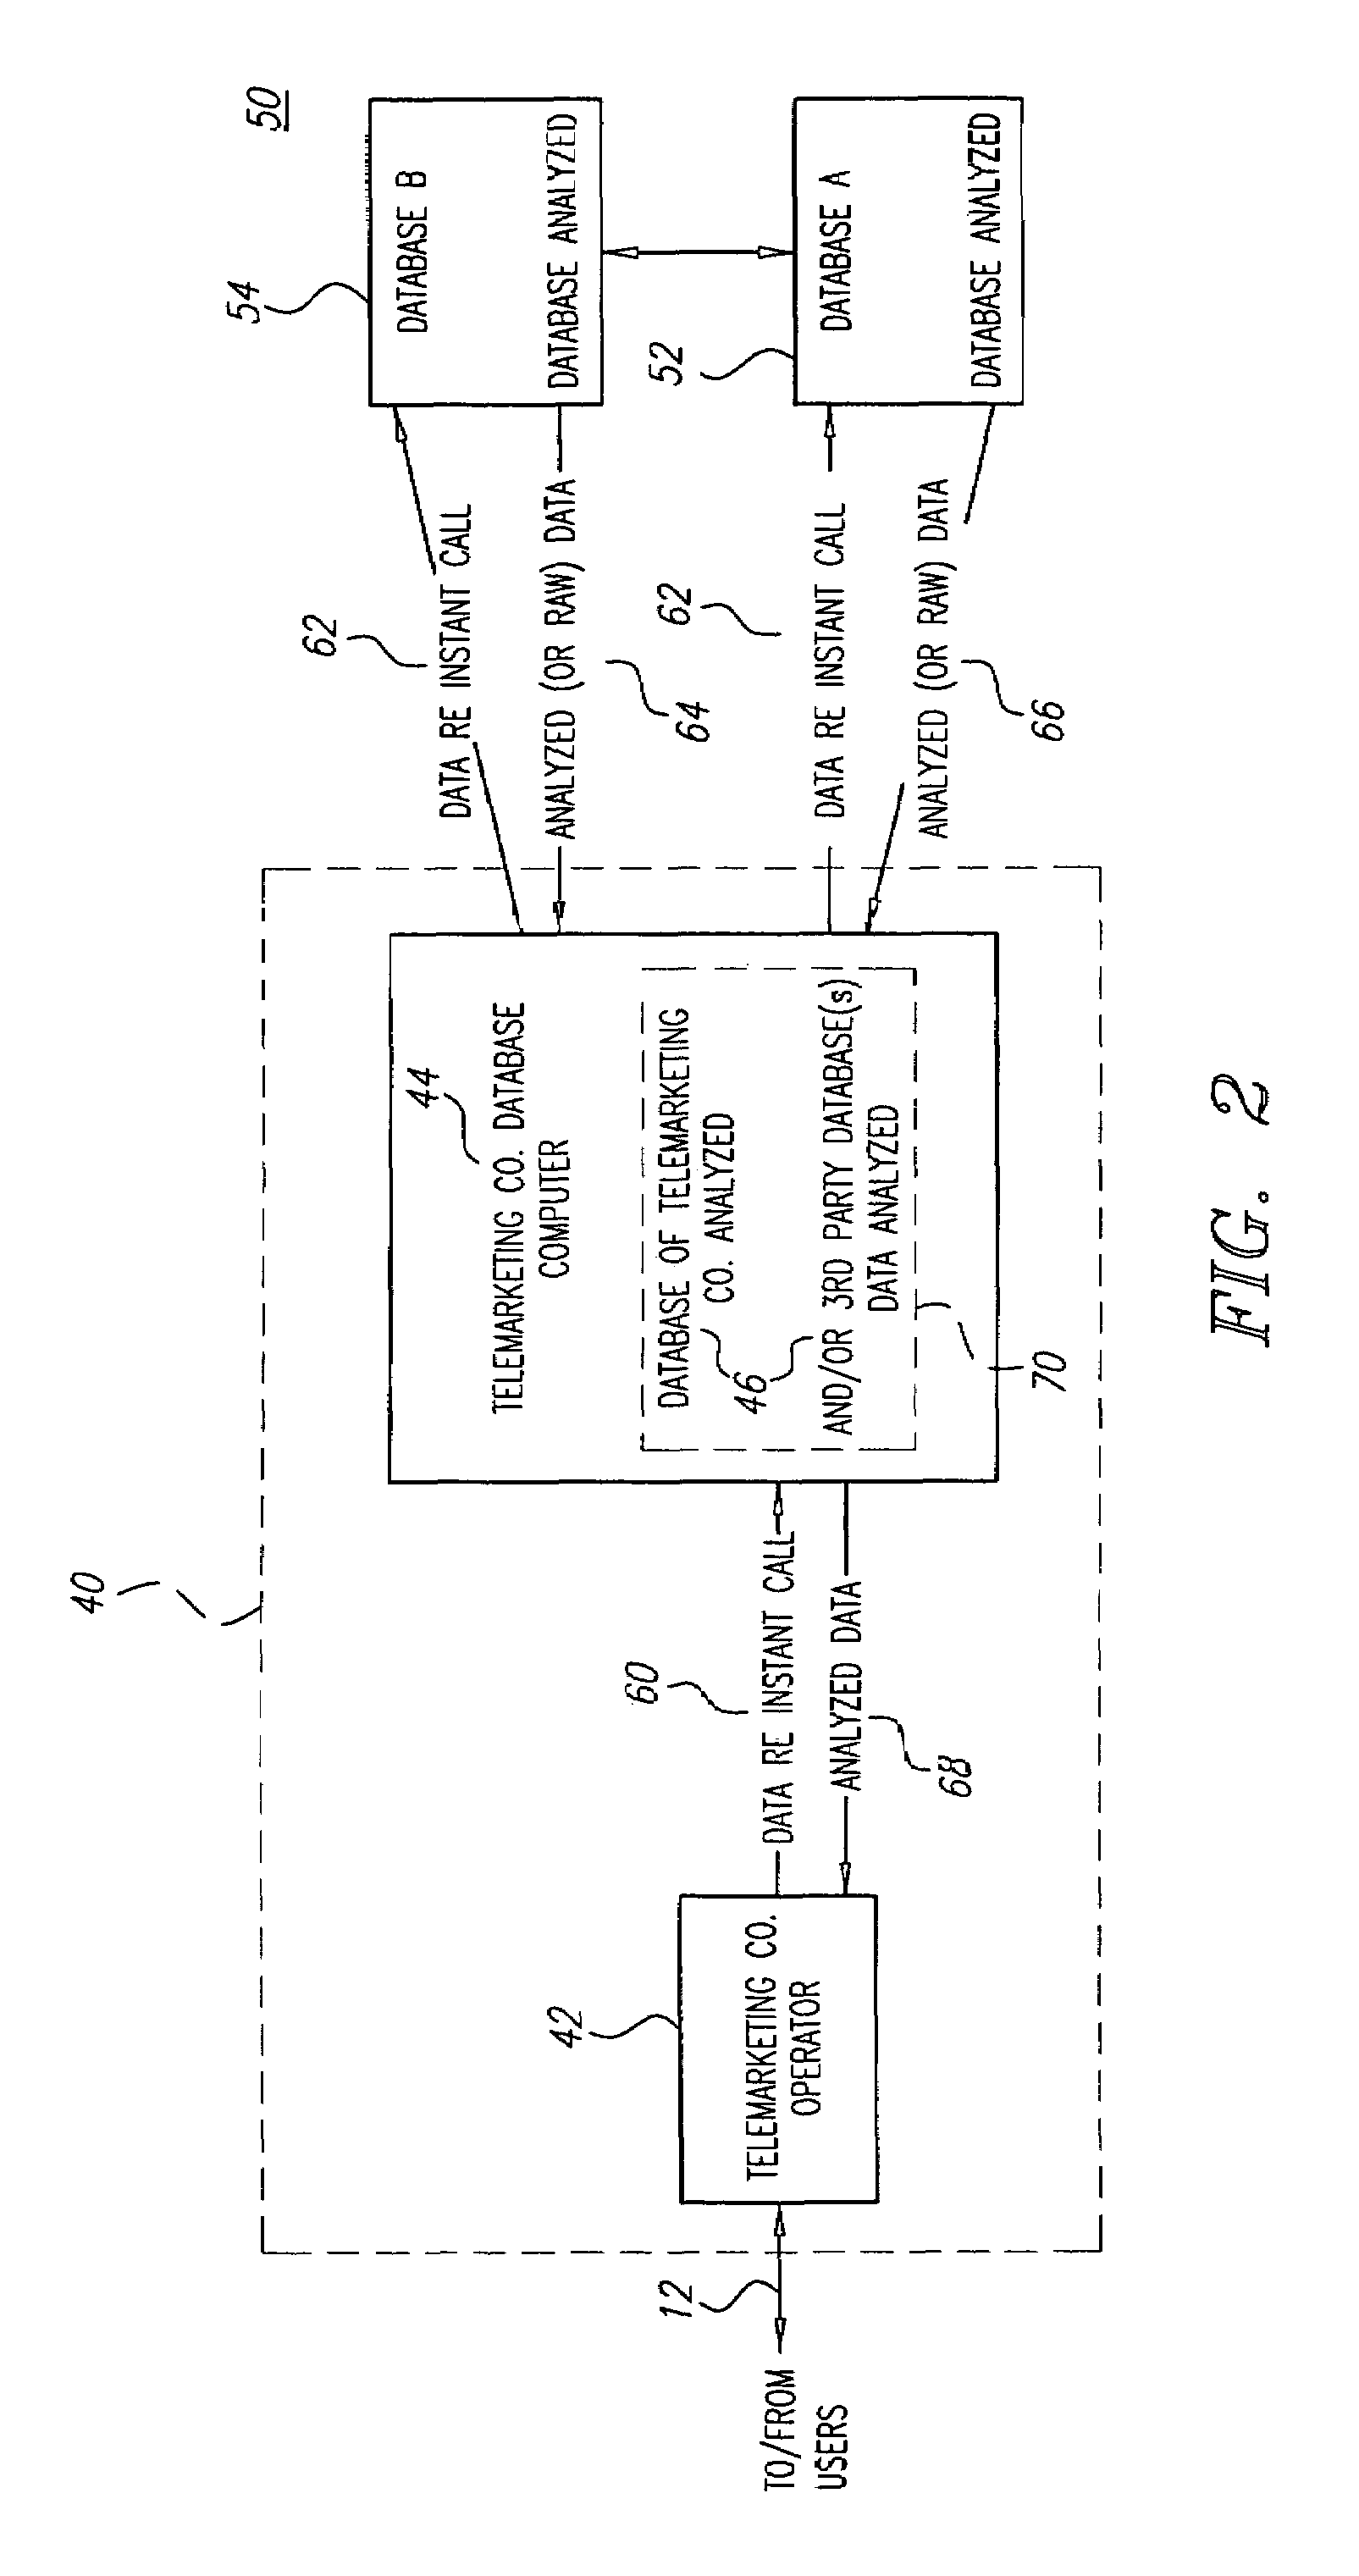 Methods and apparatus for intelligent, purpose-based selection of goods and services in telephonic and electronic commerce